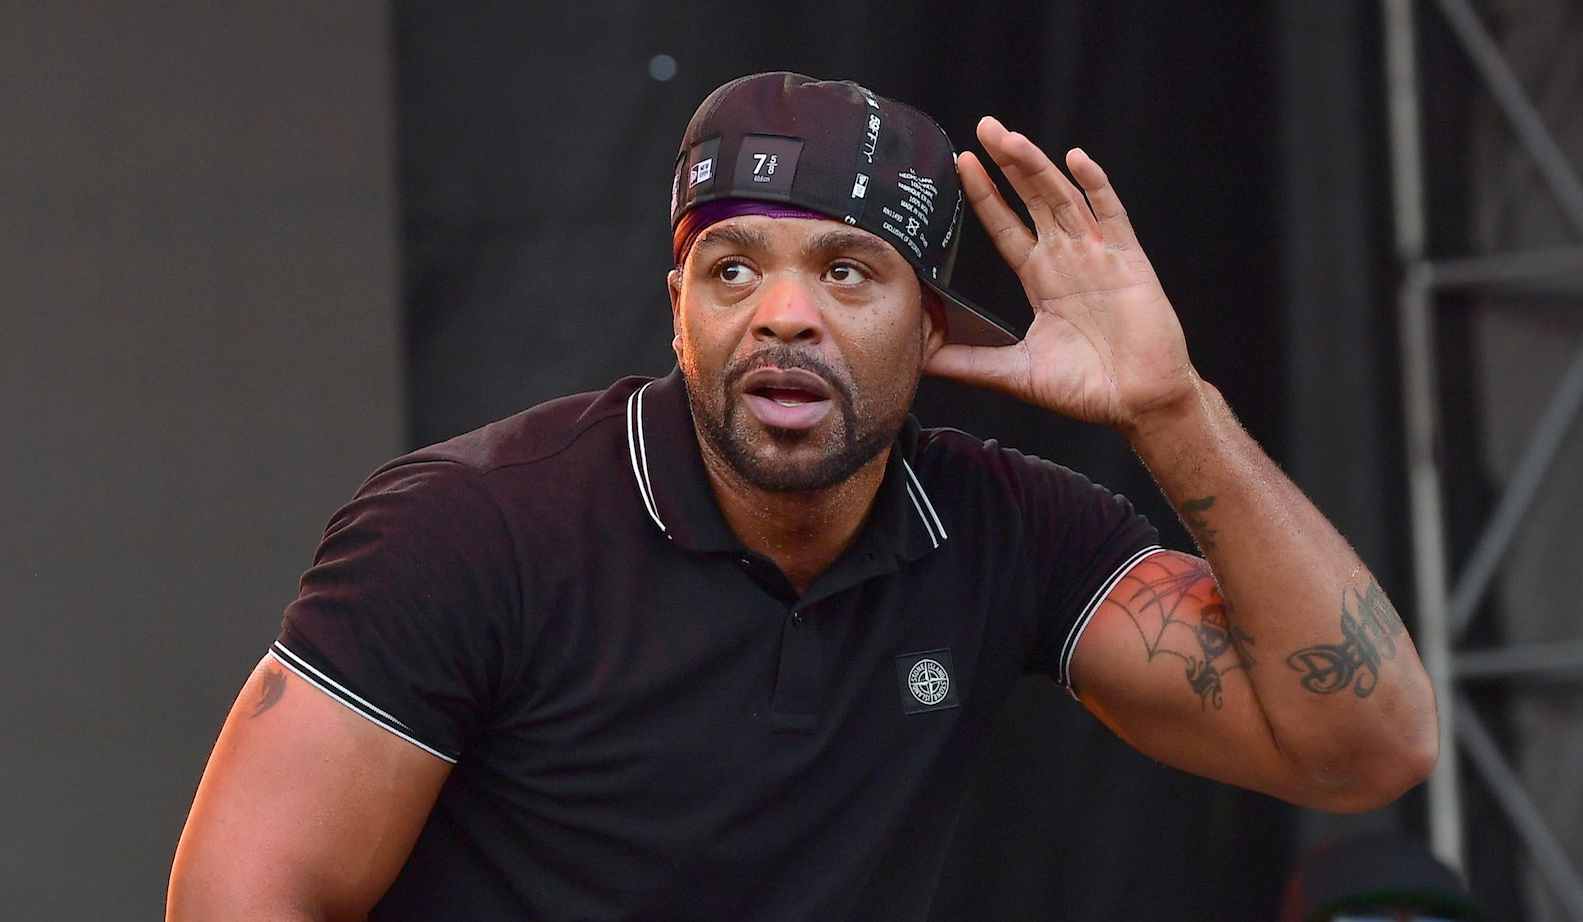 Method Man-Albums, Movies, Net Worth, Arrested, Songs, Wiki, Wife, Kids, Charity, House